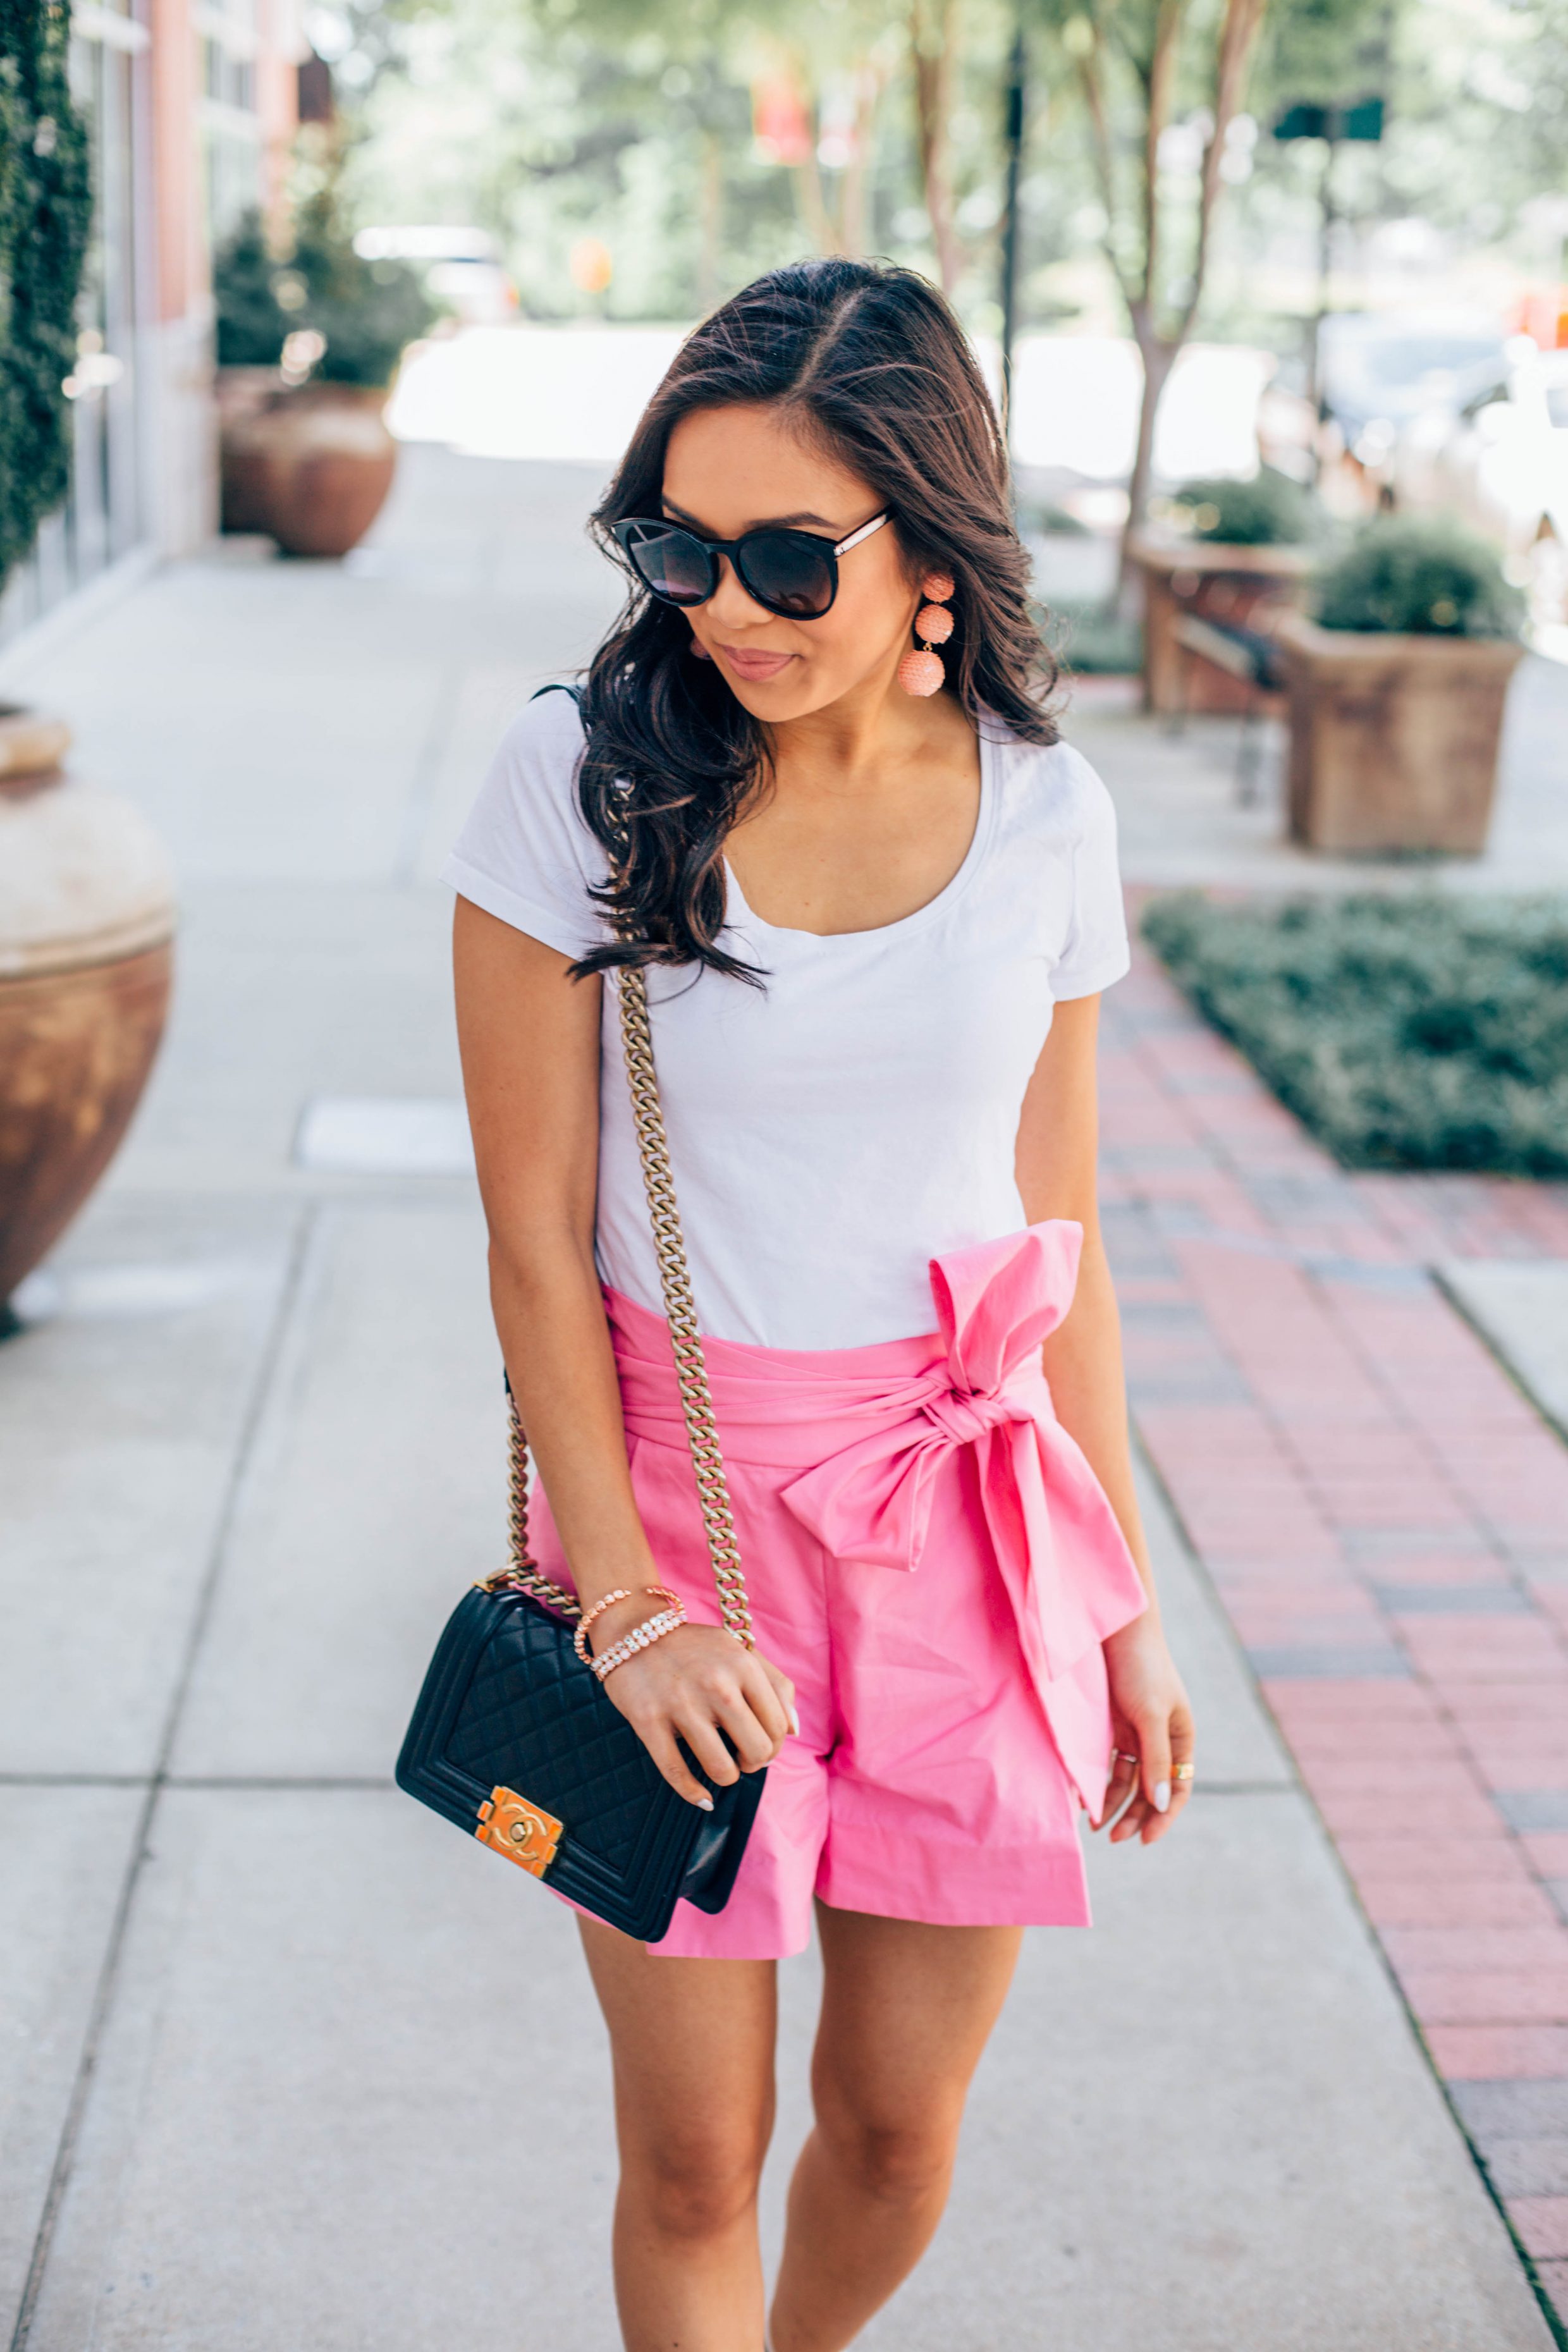 COLOR & CHIC | Summer outfit idea: pink tie-waist shorts with a white tee and sequin drop earrings